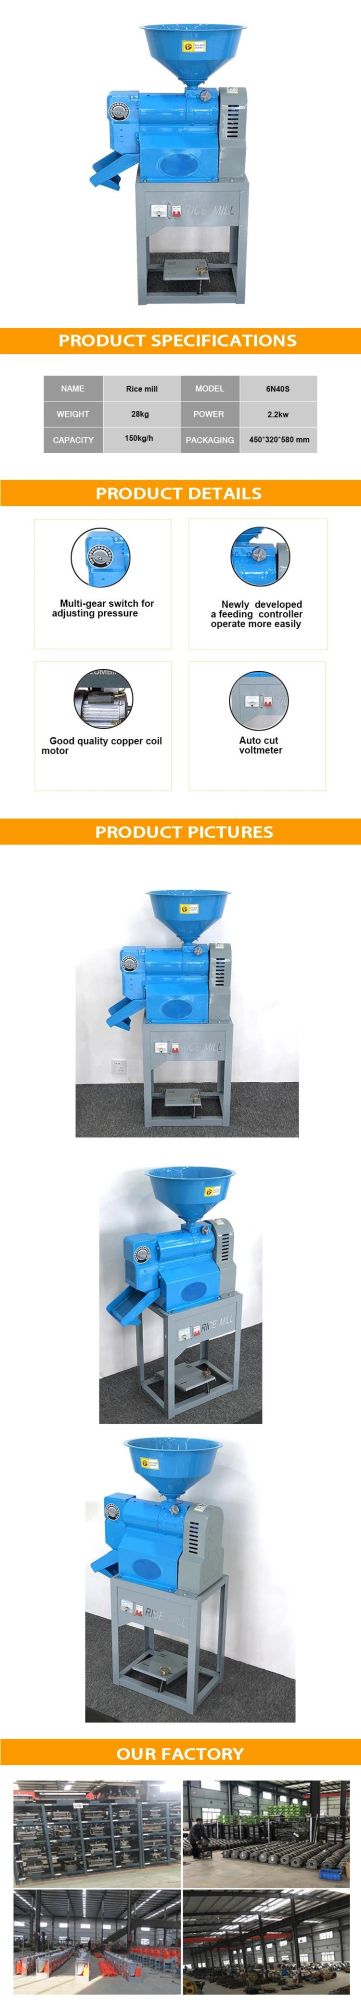 Small Scale Rice Mill Machine for Home Use